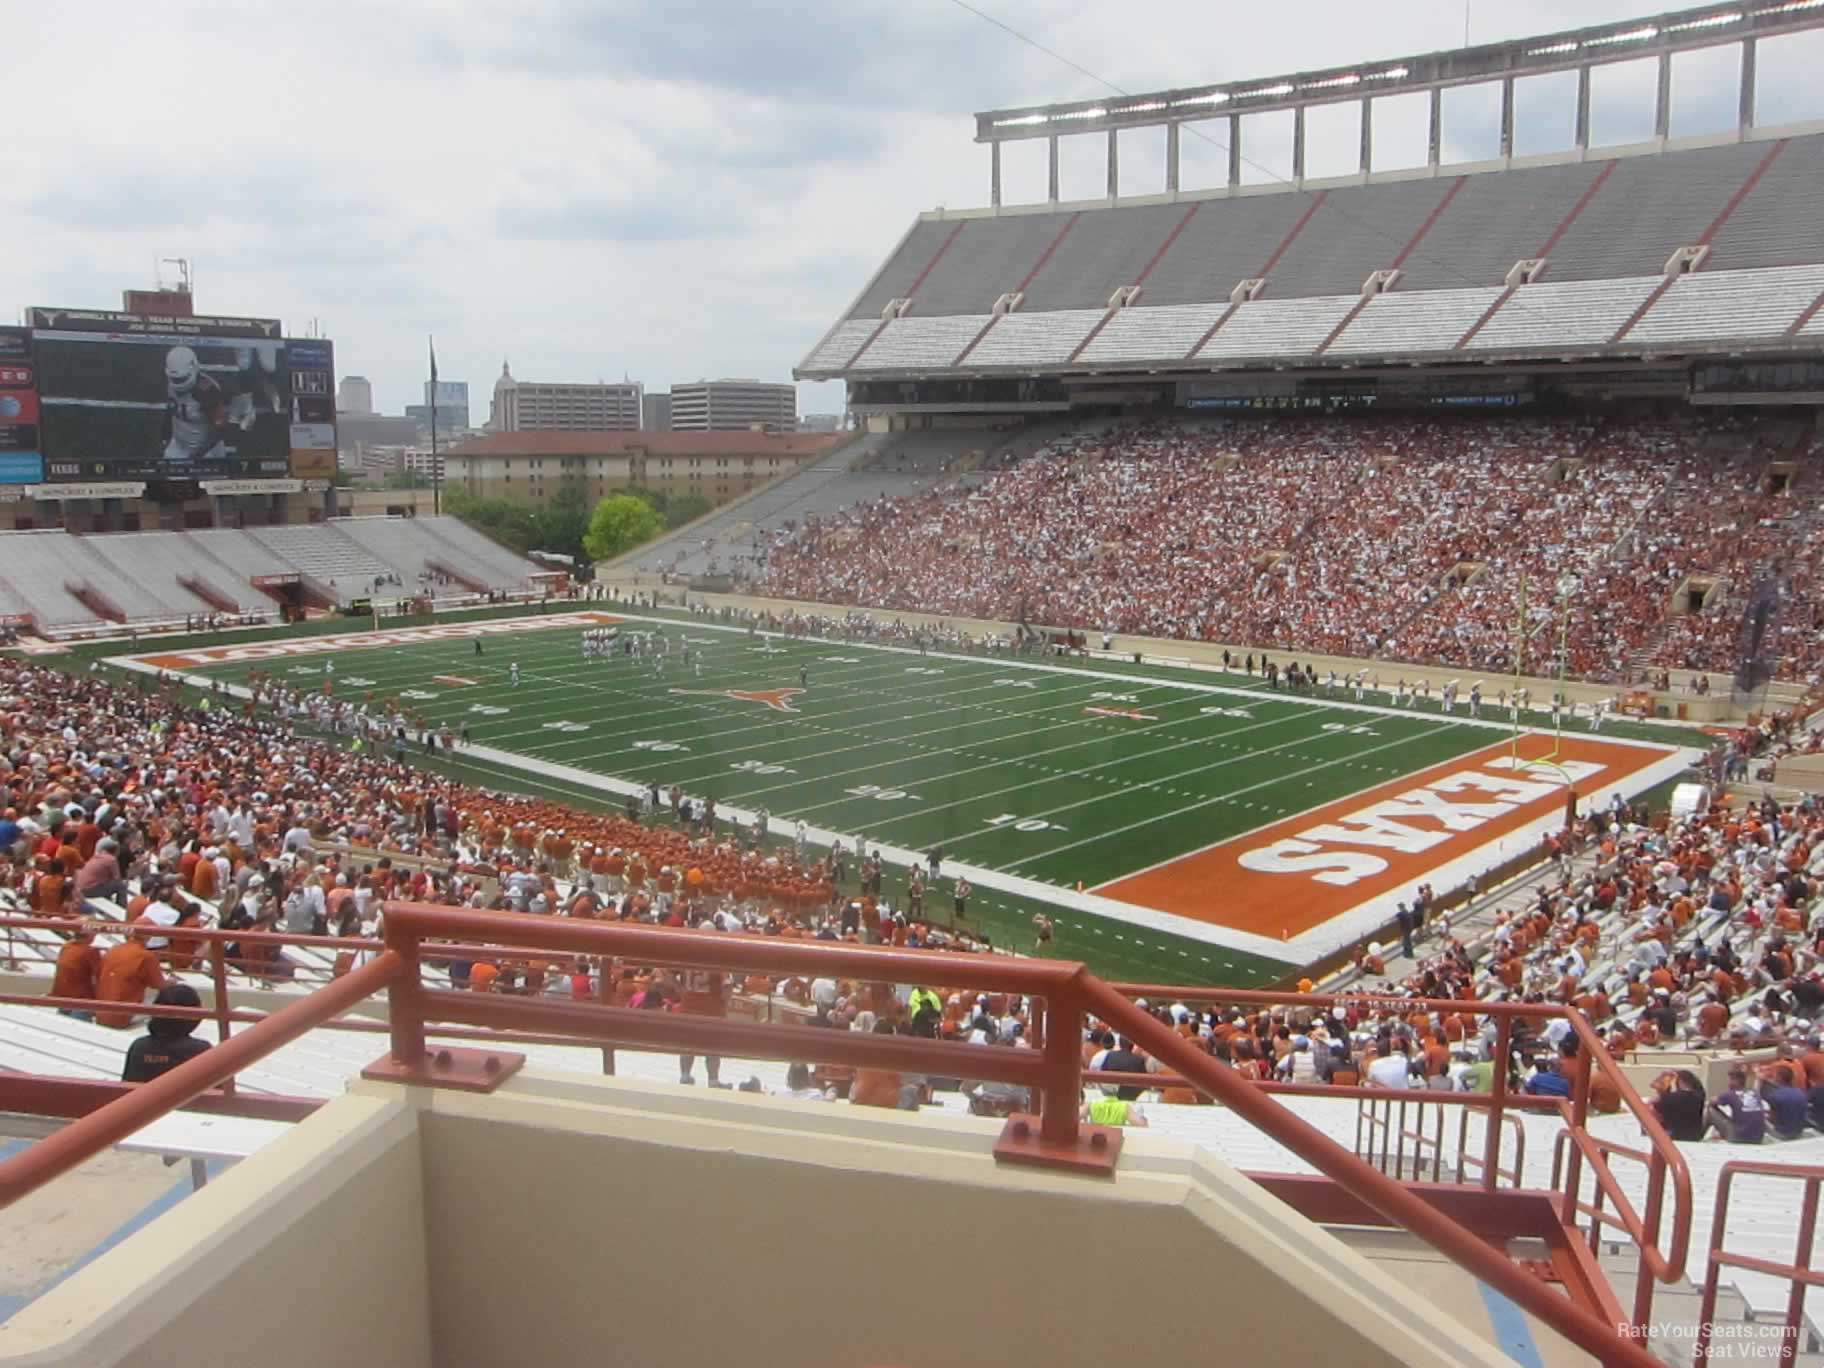 section 21, row 58 seat view  - dkr-texas memorial stadium